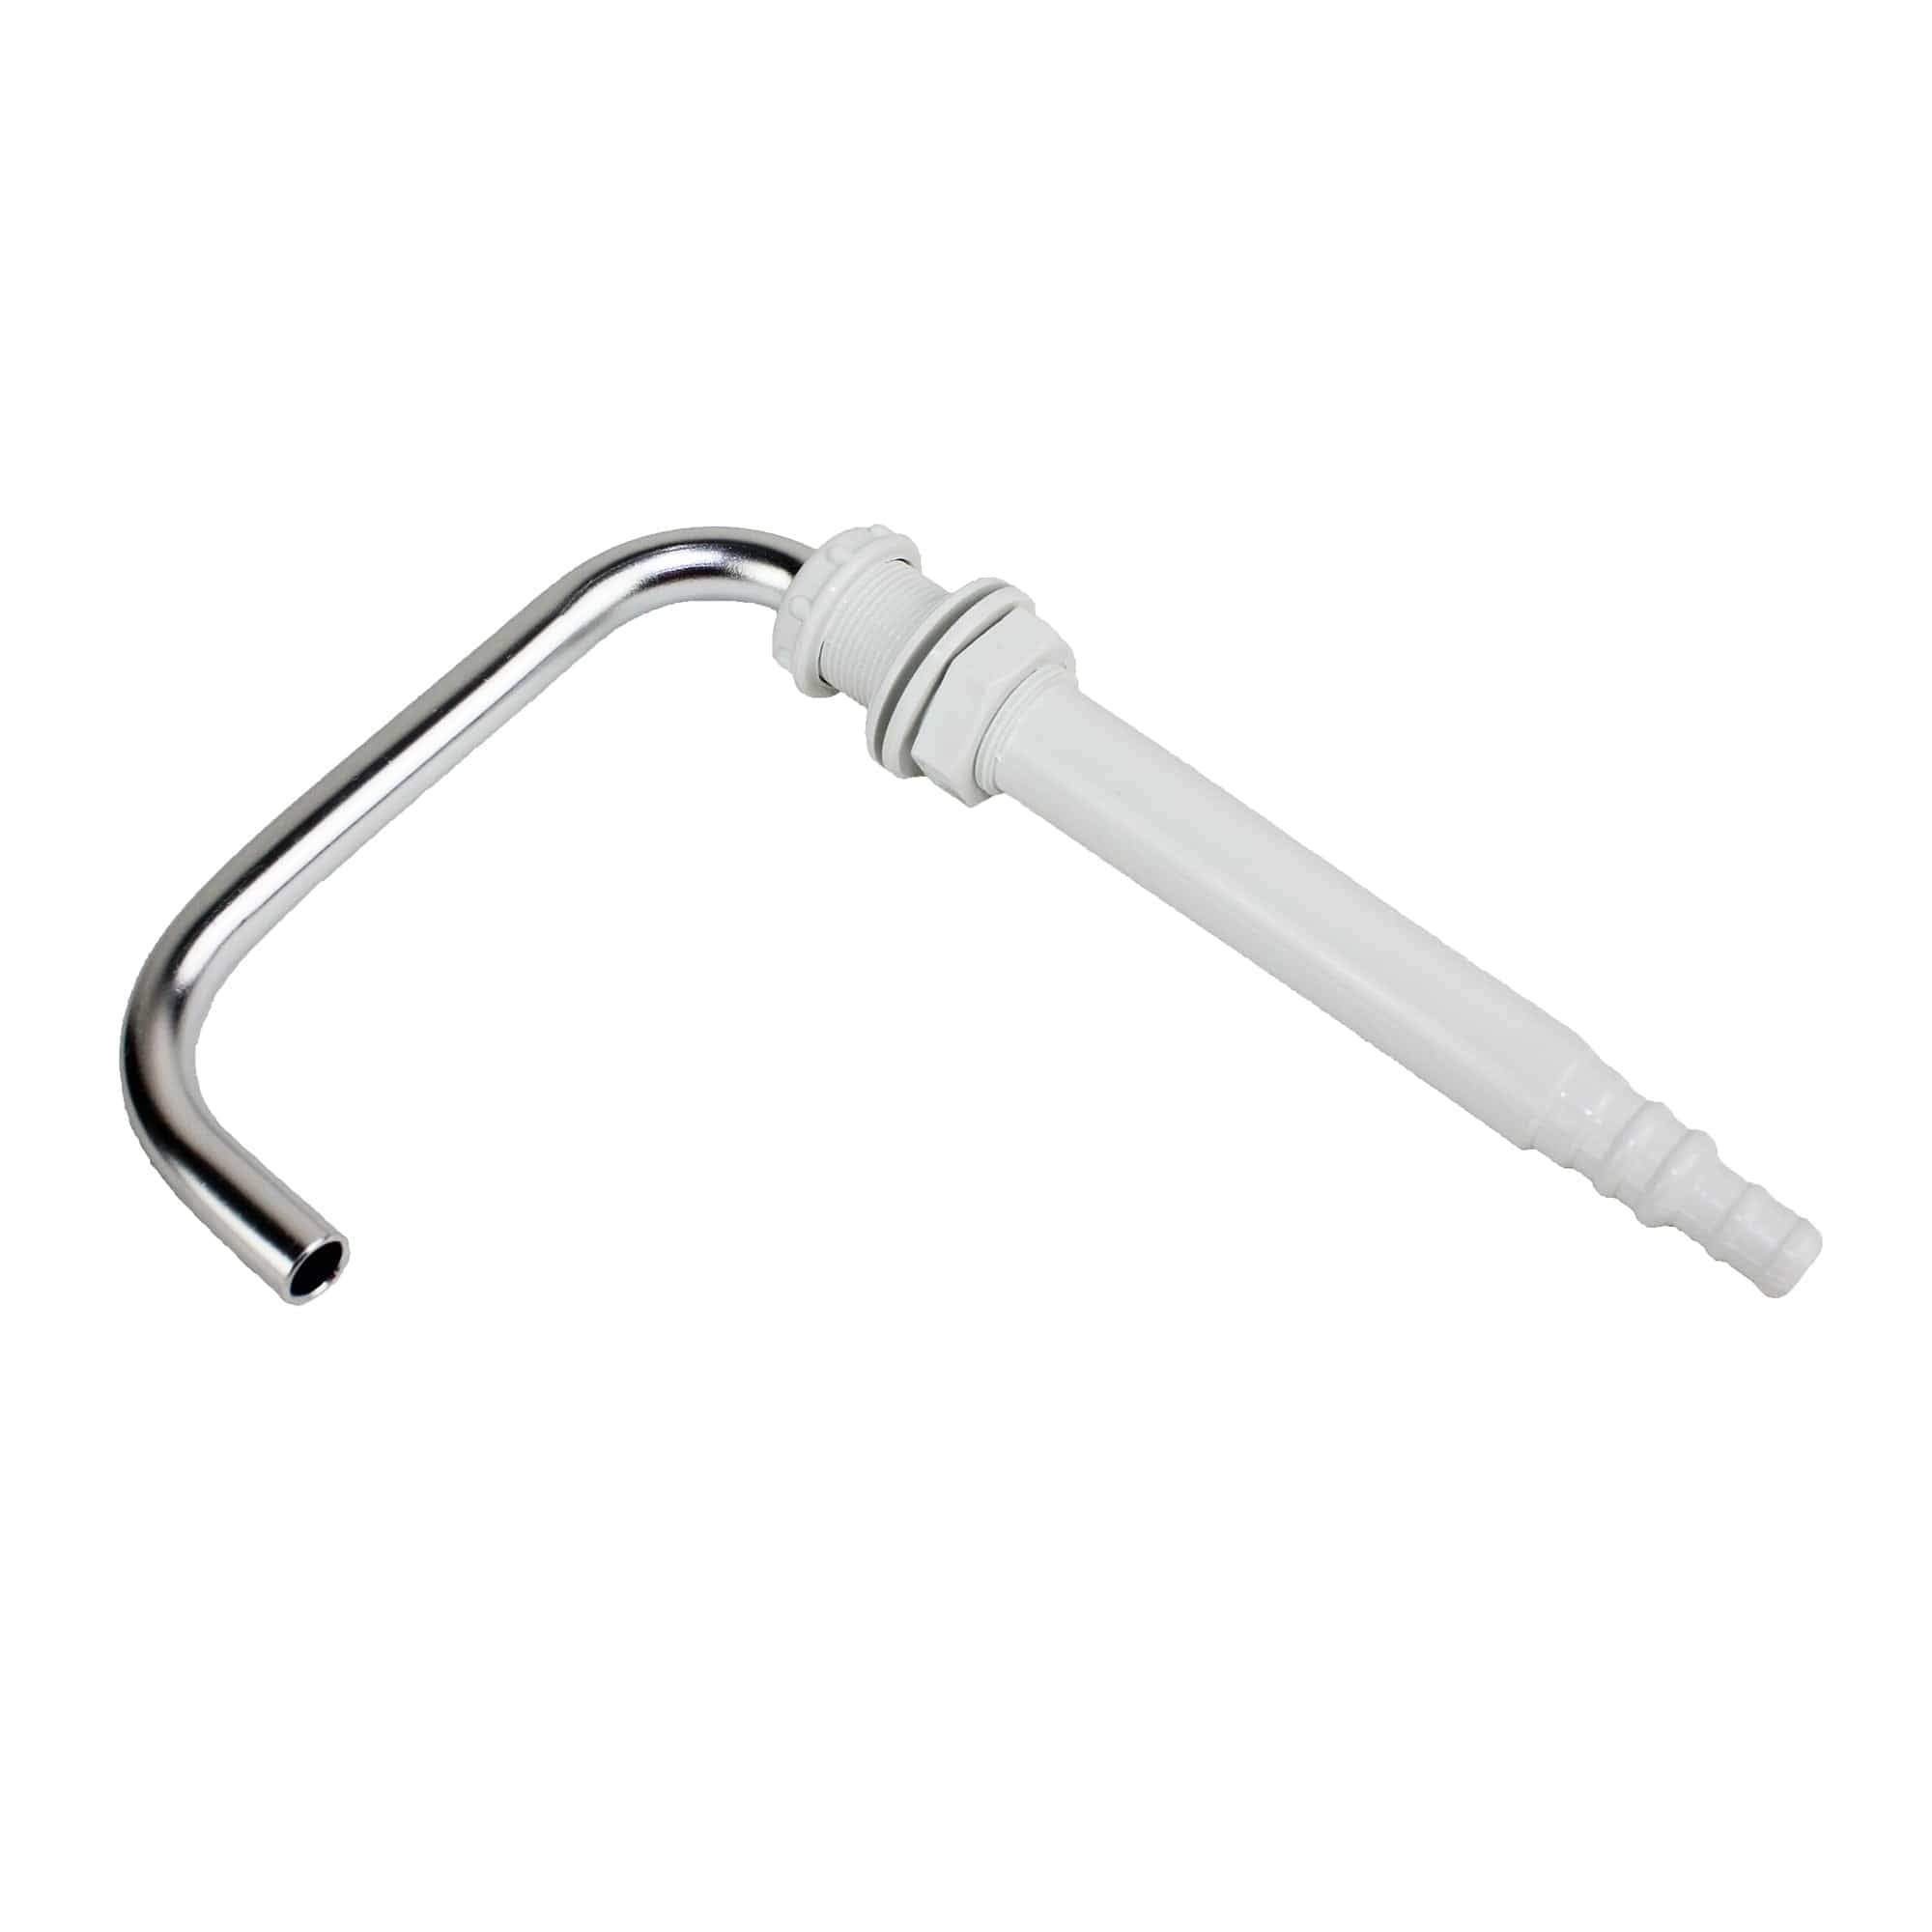 Attwood Whale FT1152 Telescopic Faucet